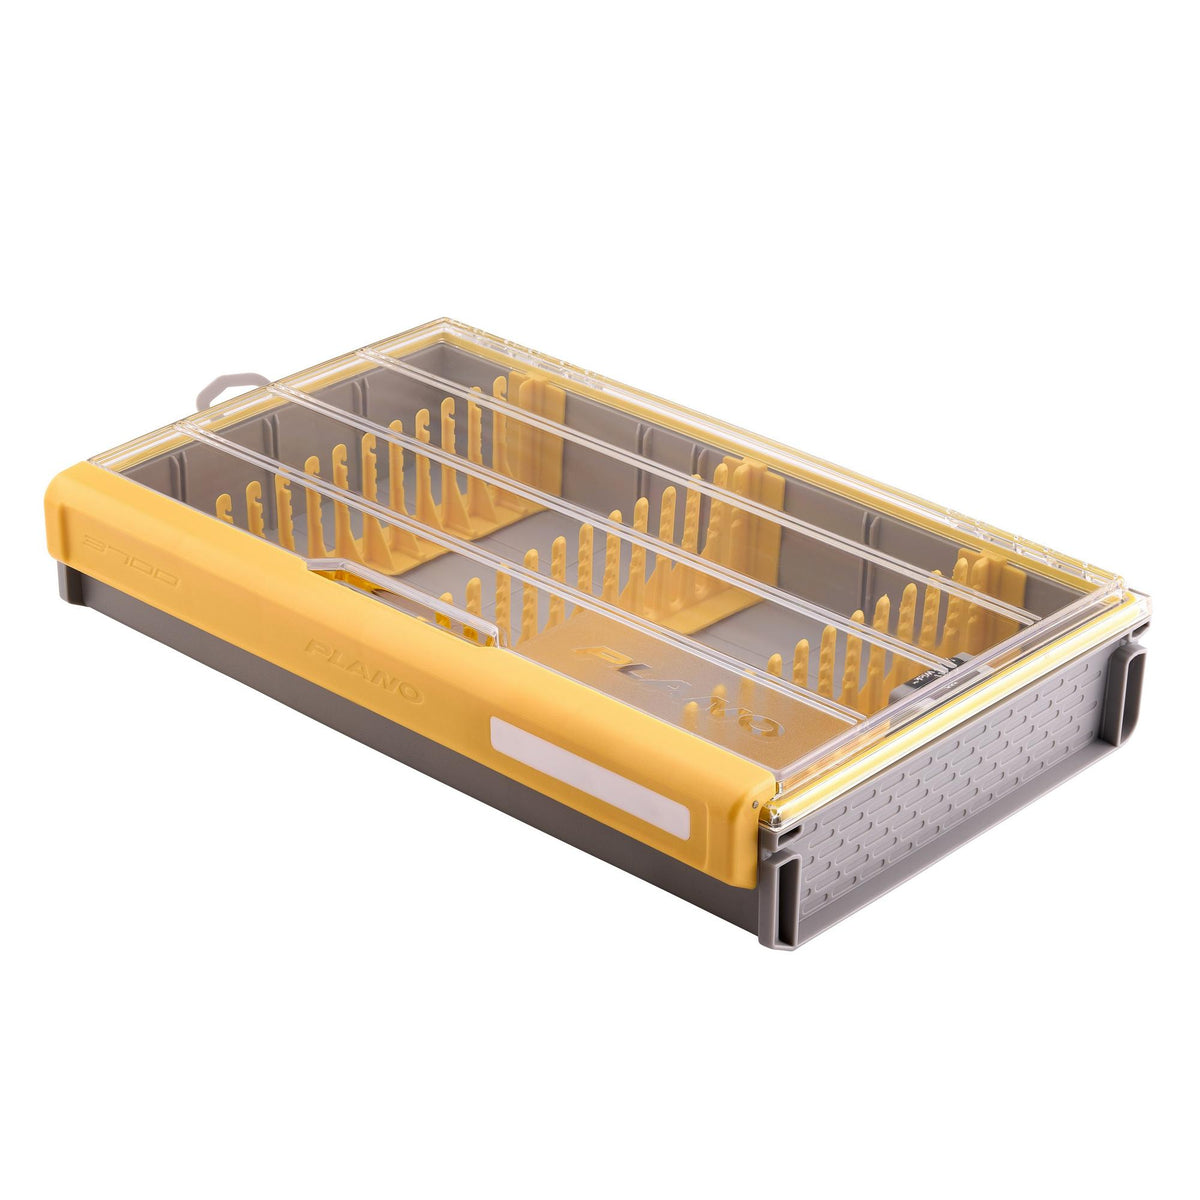 Plano Edge 3700 Premium Thin Tackle Utility Box, Clear and Yellow,  Waterproof and Rust-Resistant Bait and Tackle Box Storage Organization 3700  Thin